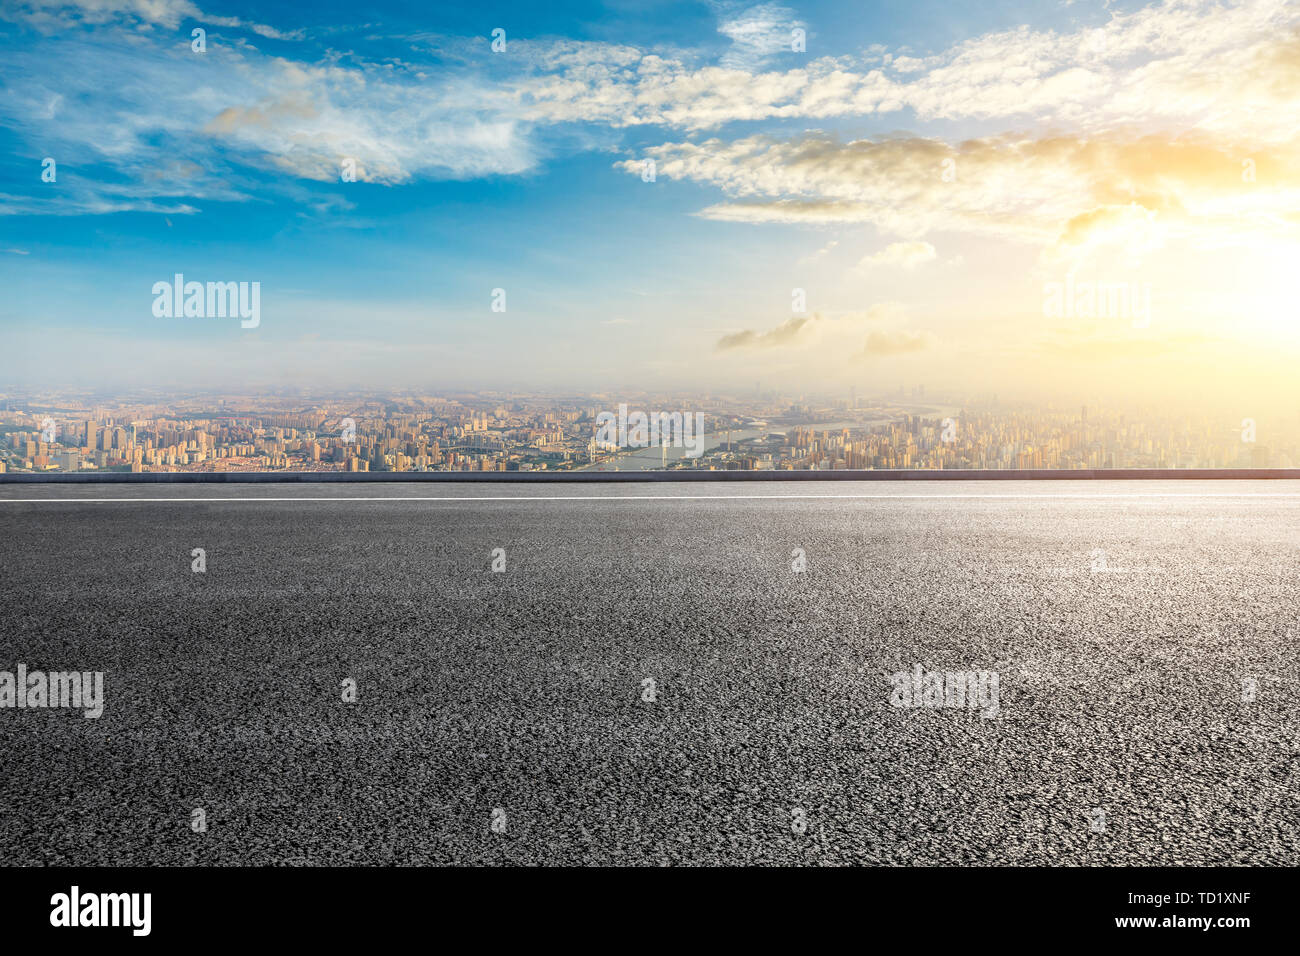 Empty highway road and modern city skyline in Shanghai,China Stock Photo